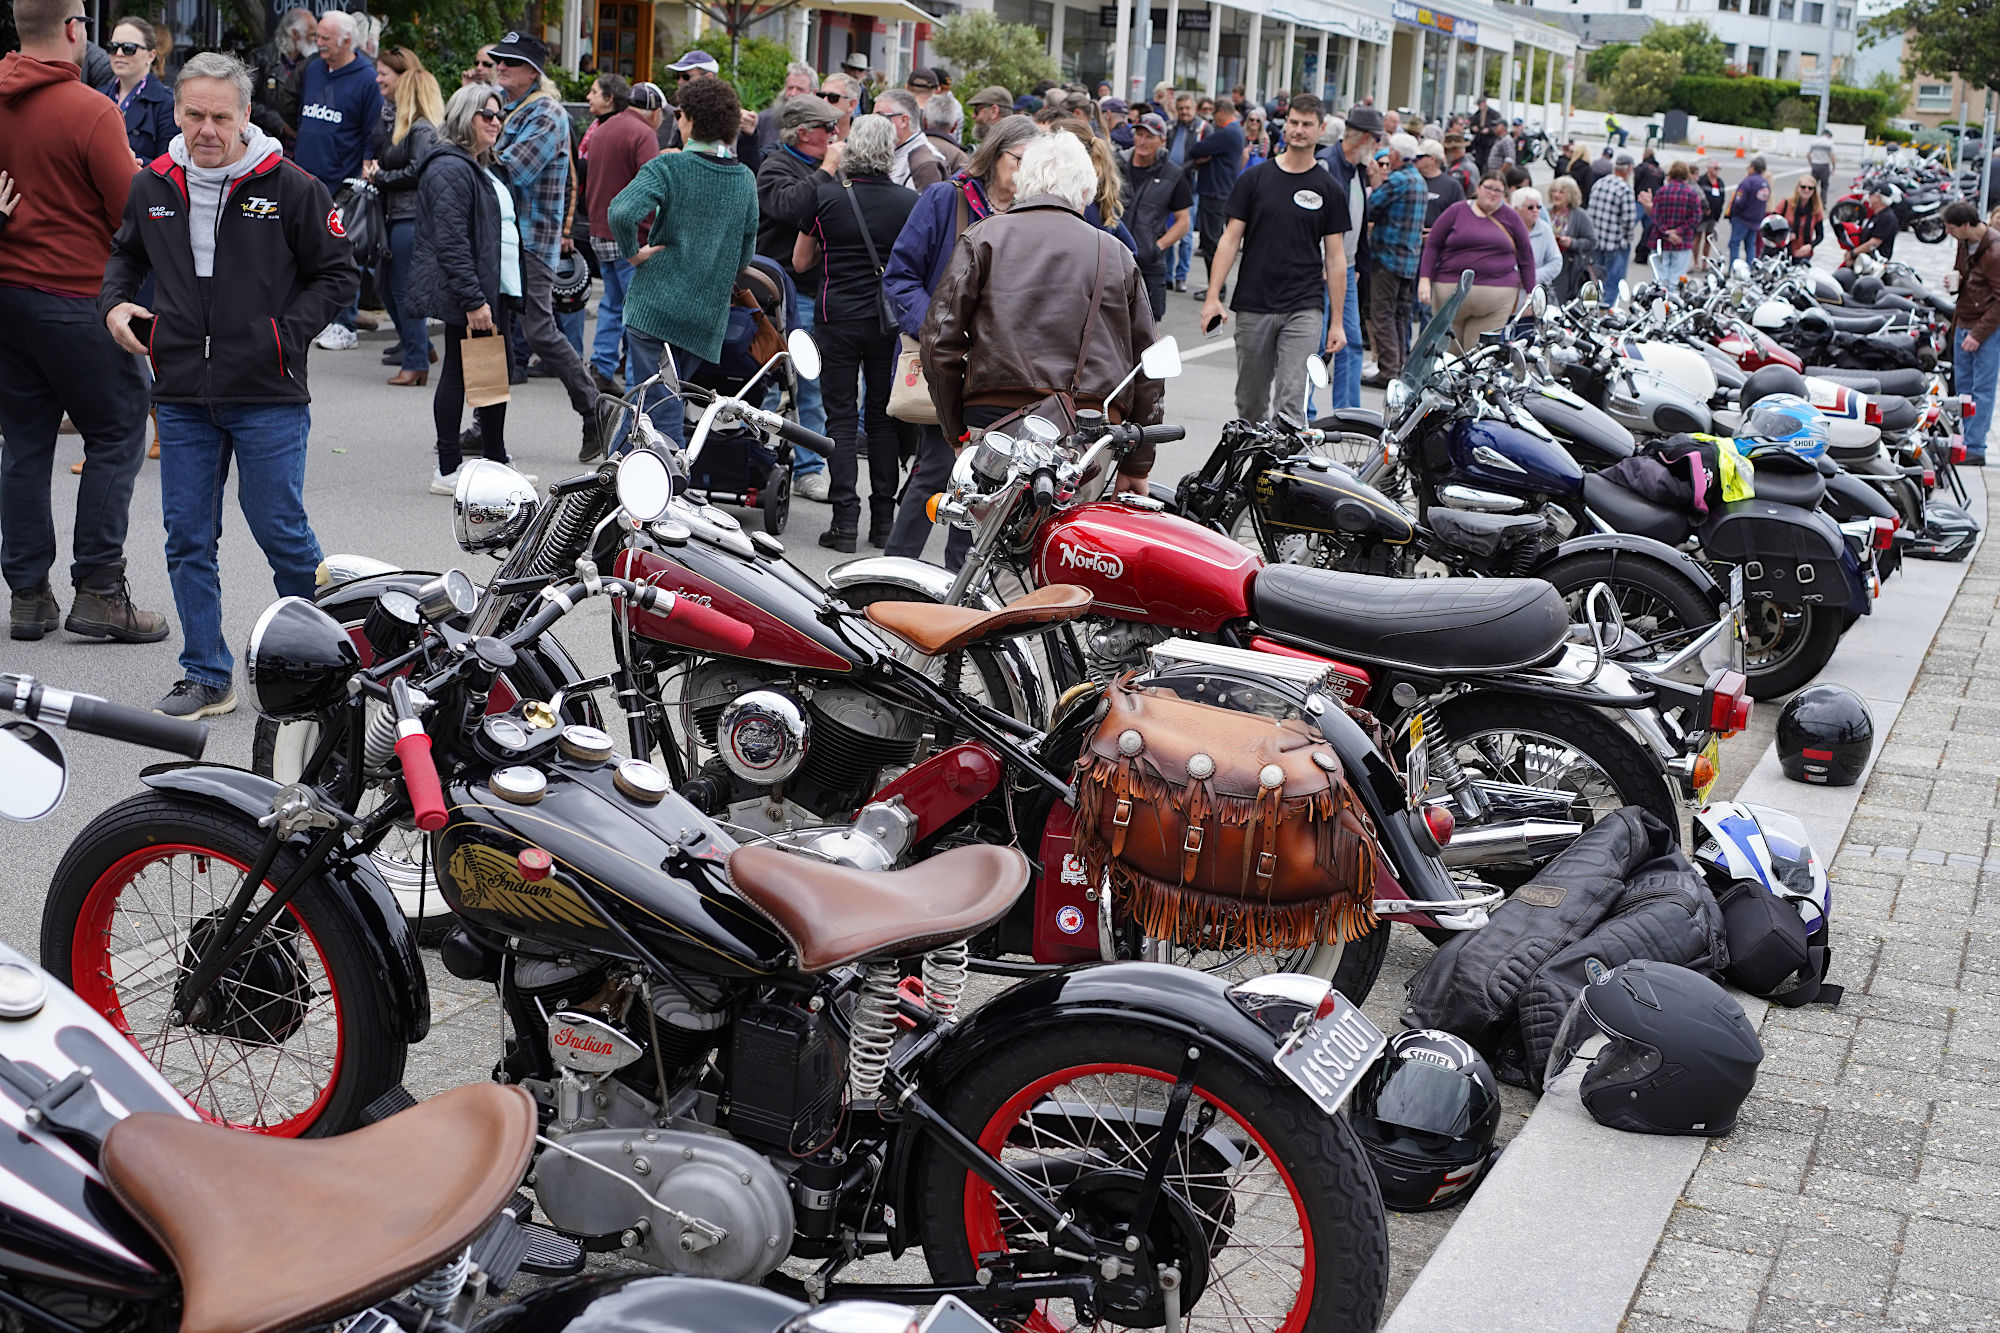 Crowds and old bikes.